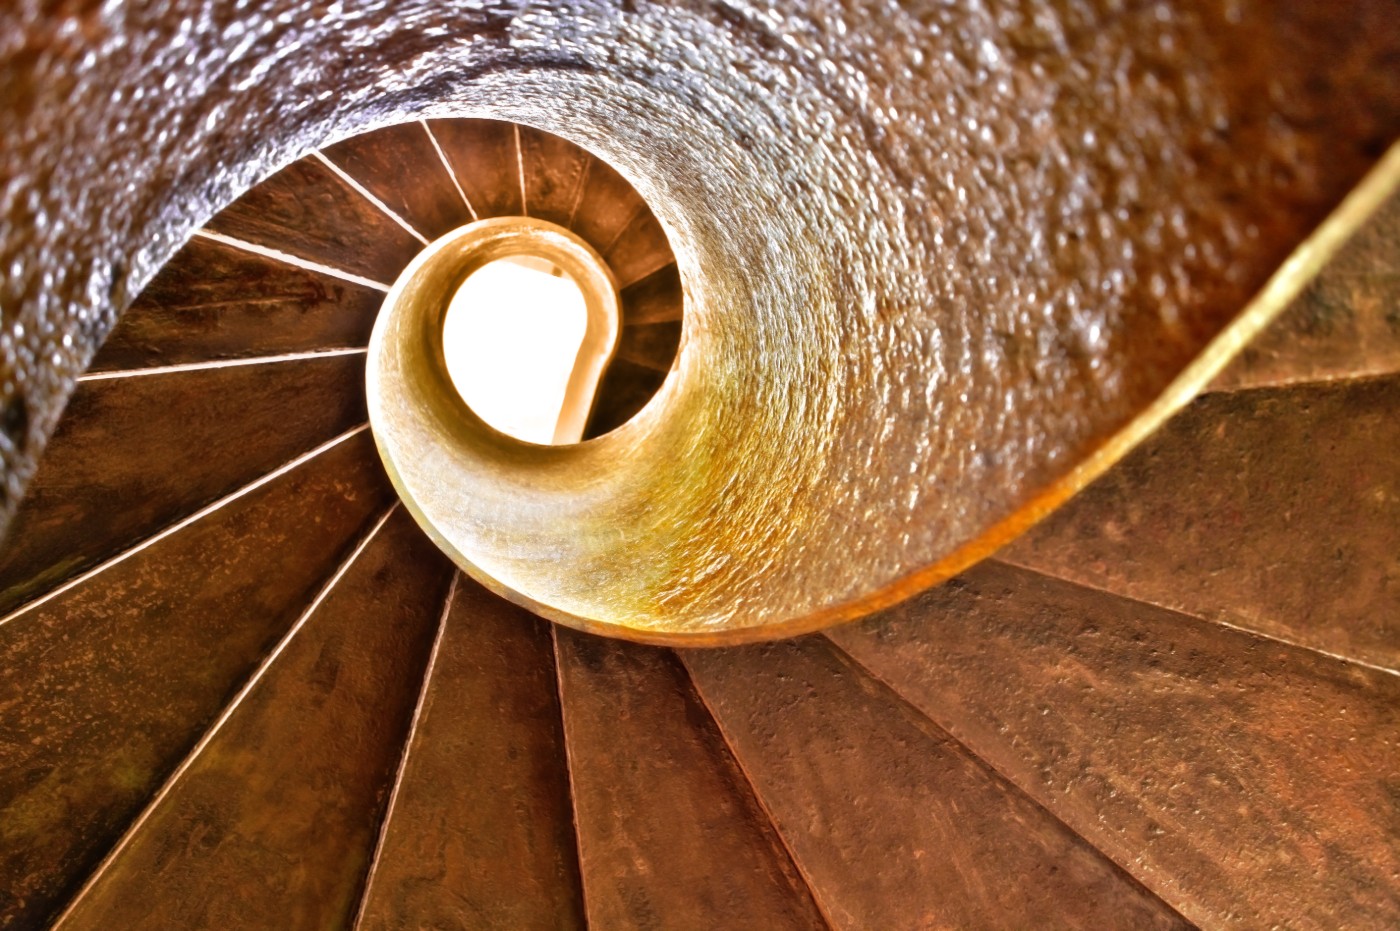 https://tickertapecdn.tdameritrade.com/assets/images/pages/md/golden ratio staircase: key financial ratios to help value stocks